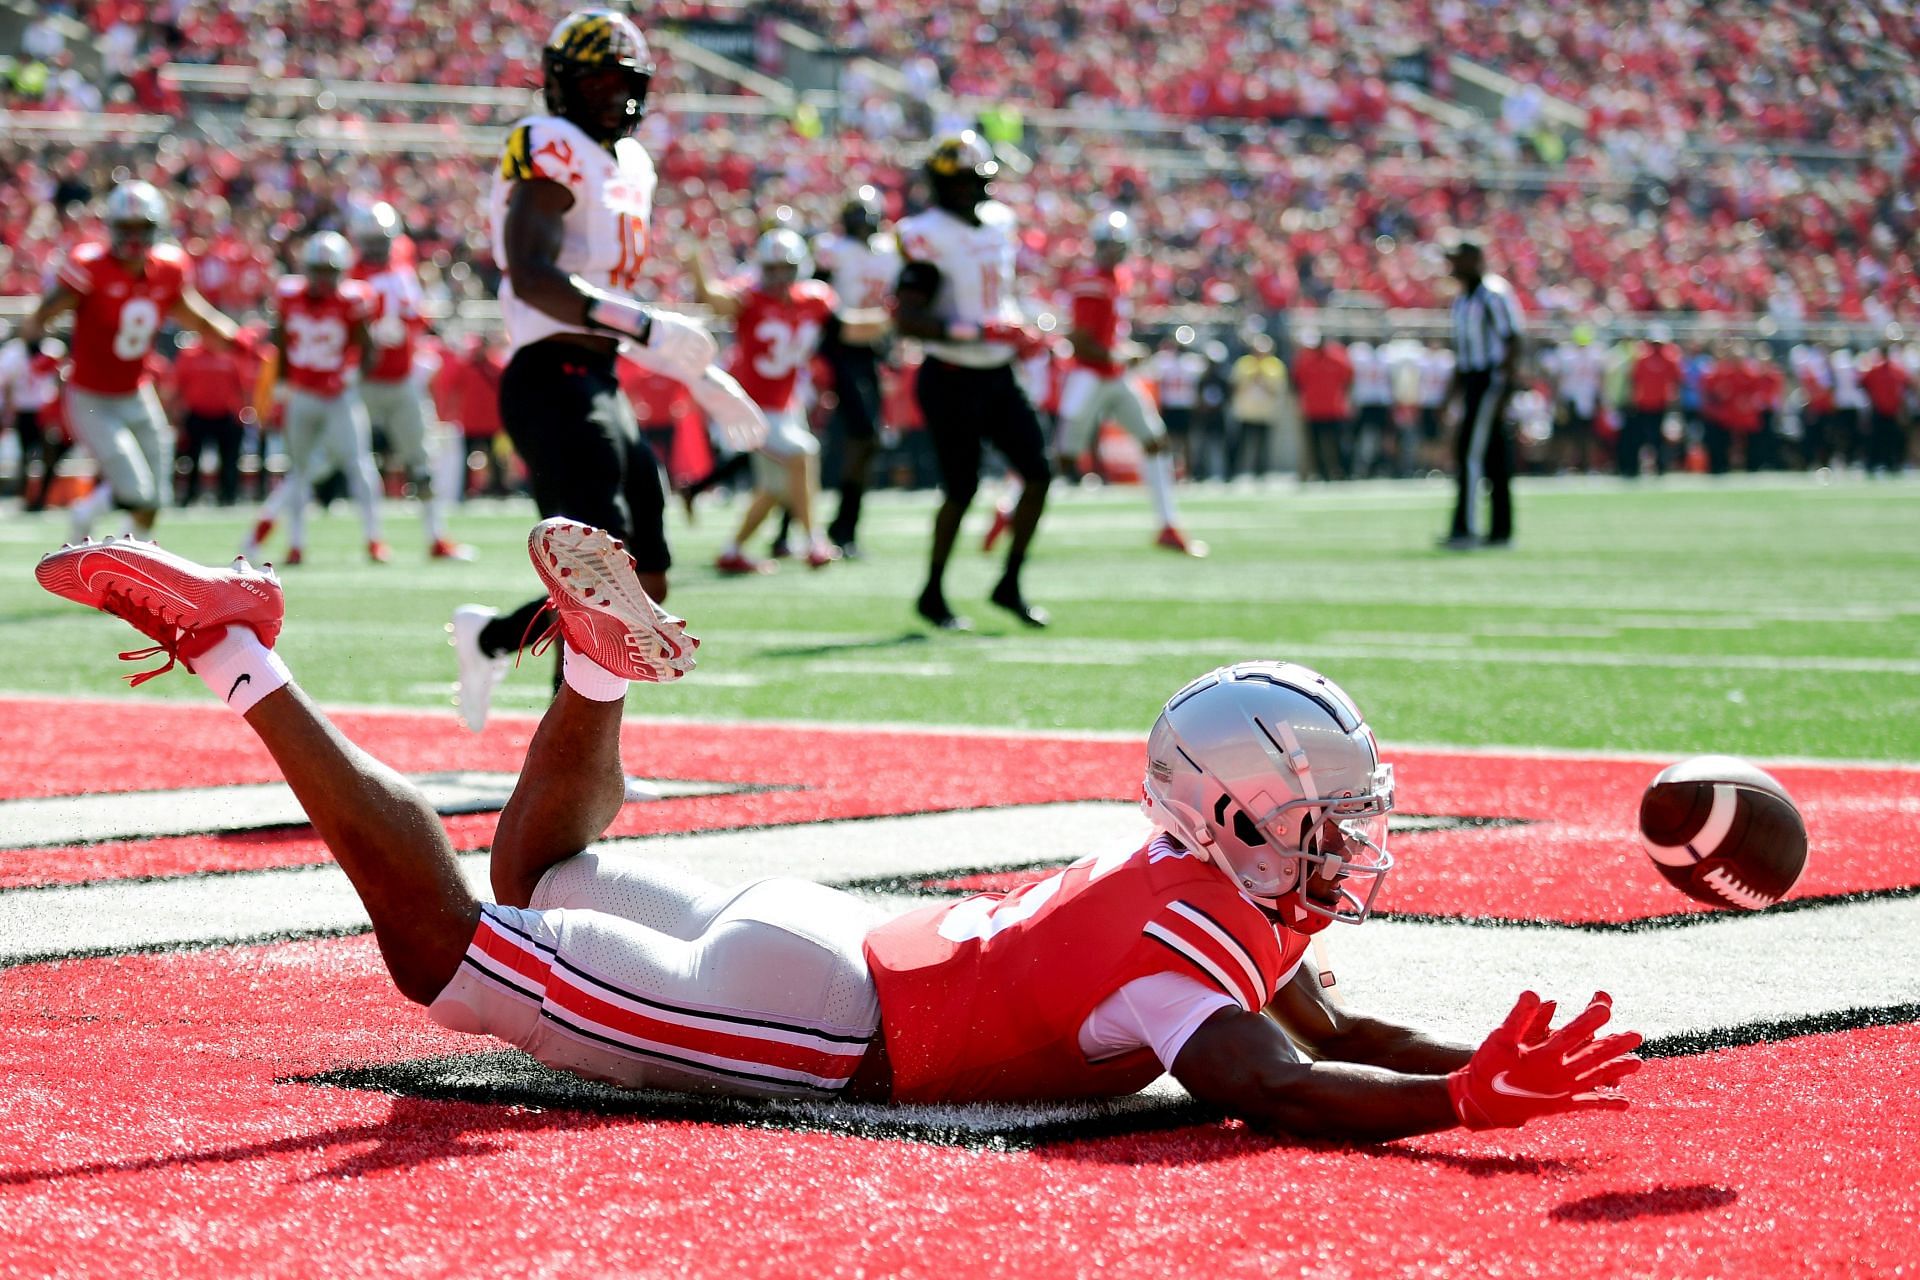 Garrett Wilson #5 of the Ohio State Buckeyes dives to try to catch a pass in the endzone in the first quarter during a game against the Maryland Terrapins at Ohio Stadium on October 09, 2021 in Columbus, Ohio.